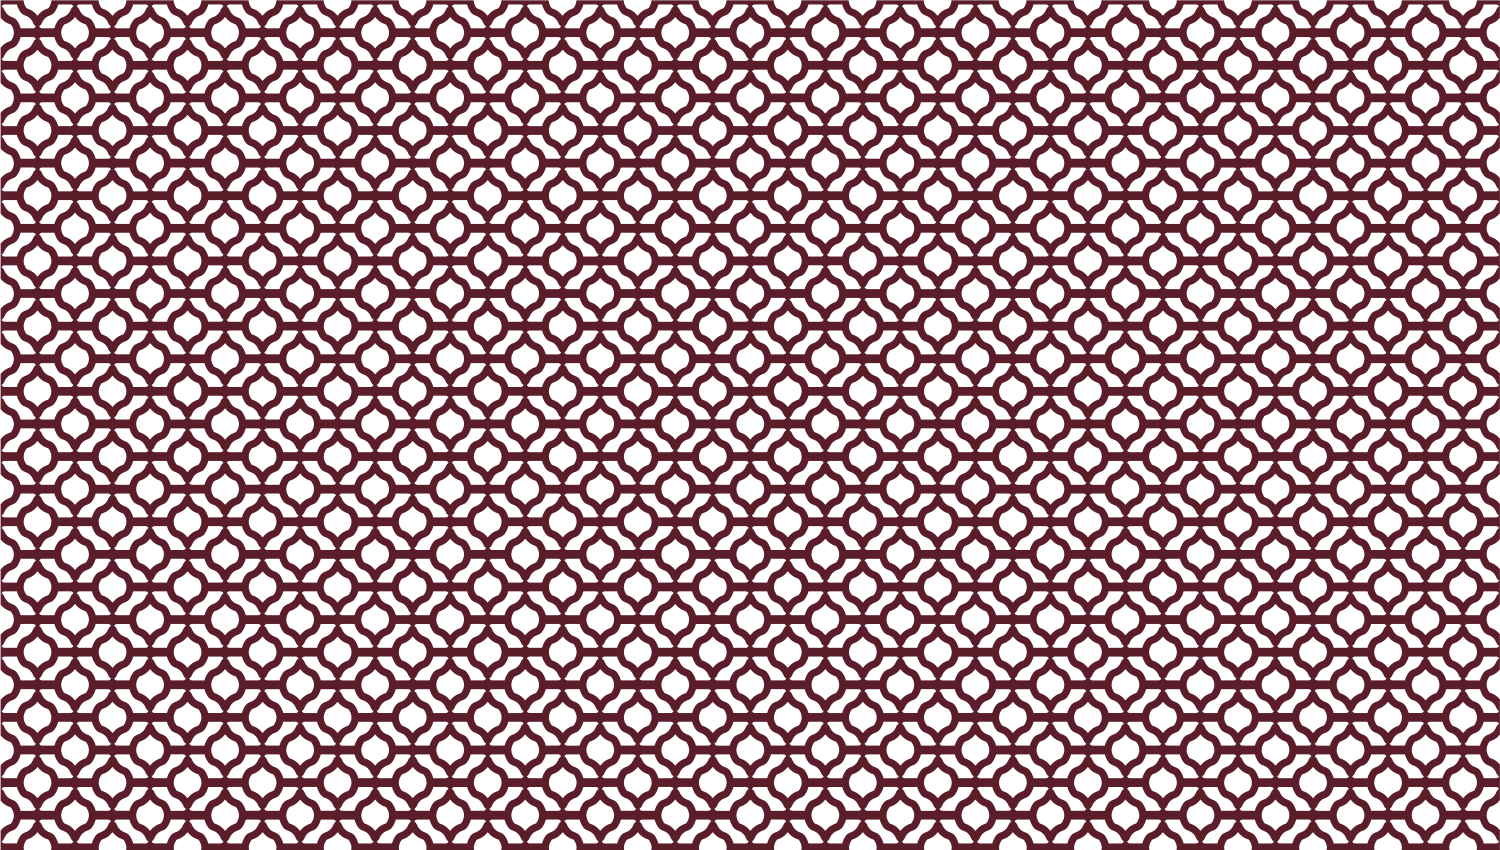 Parasoleil™ Diane© pattern displayed with a burgundy color overlay